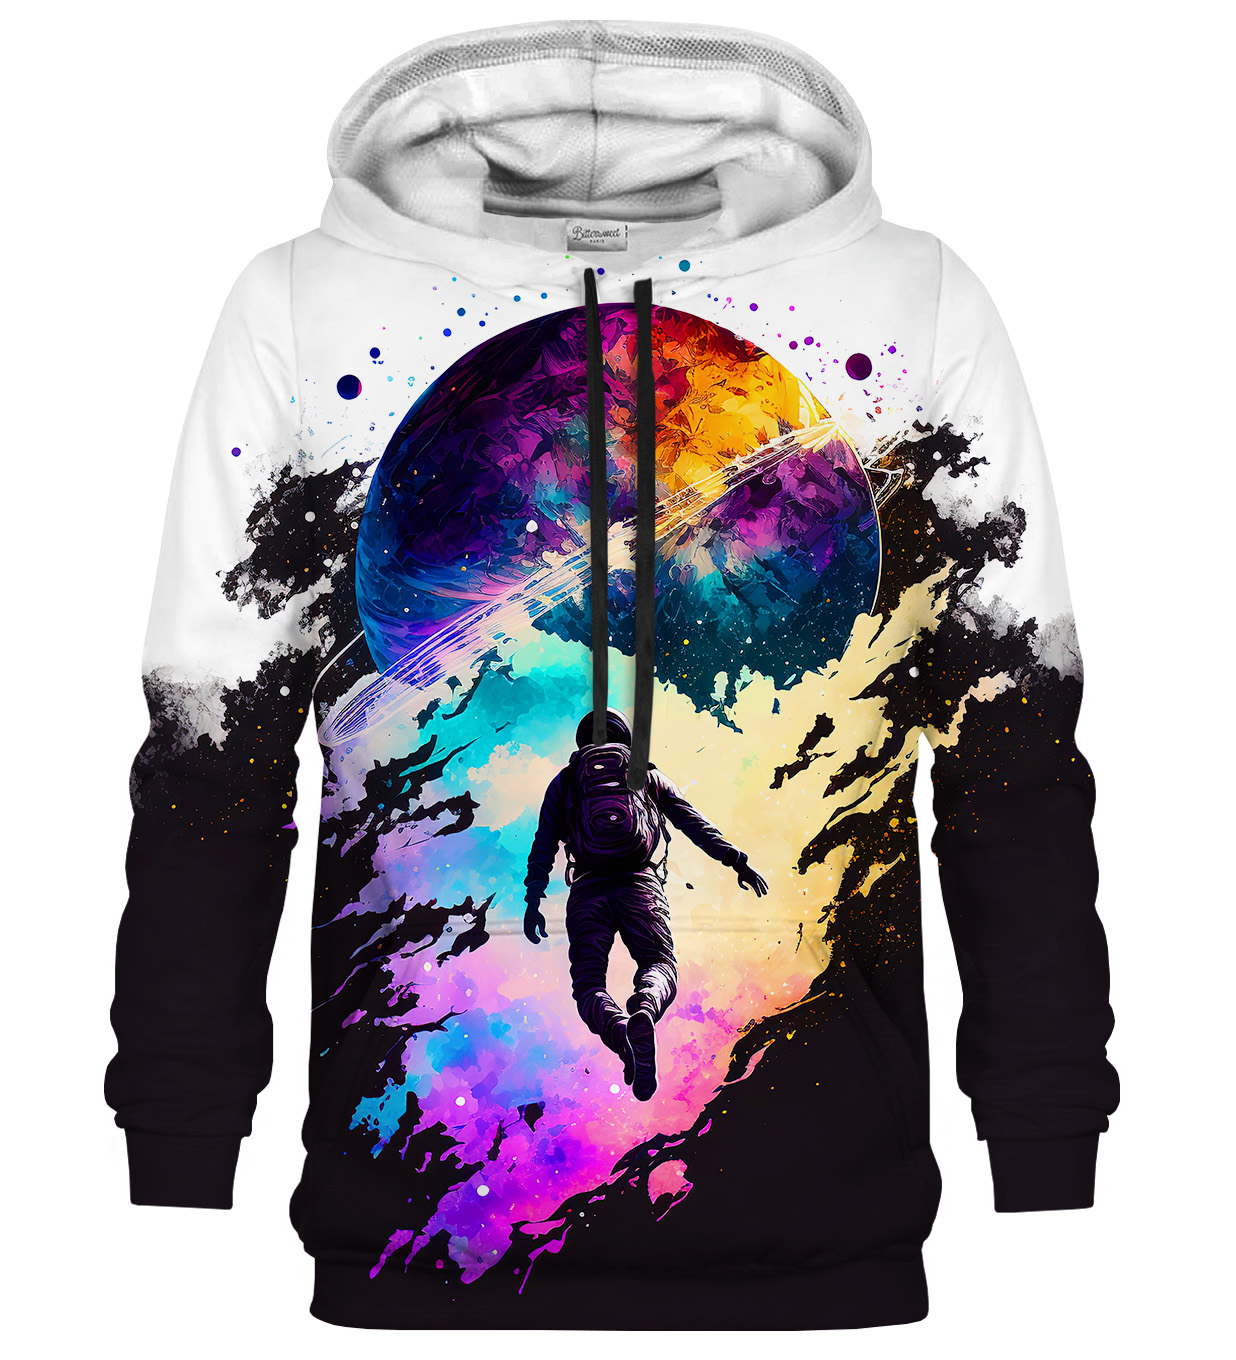 Searching For Colors Hoodie - 2XL